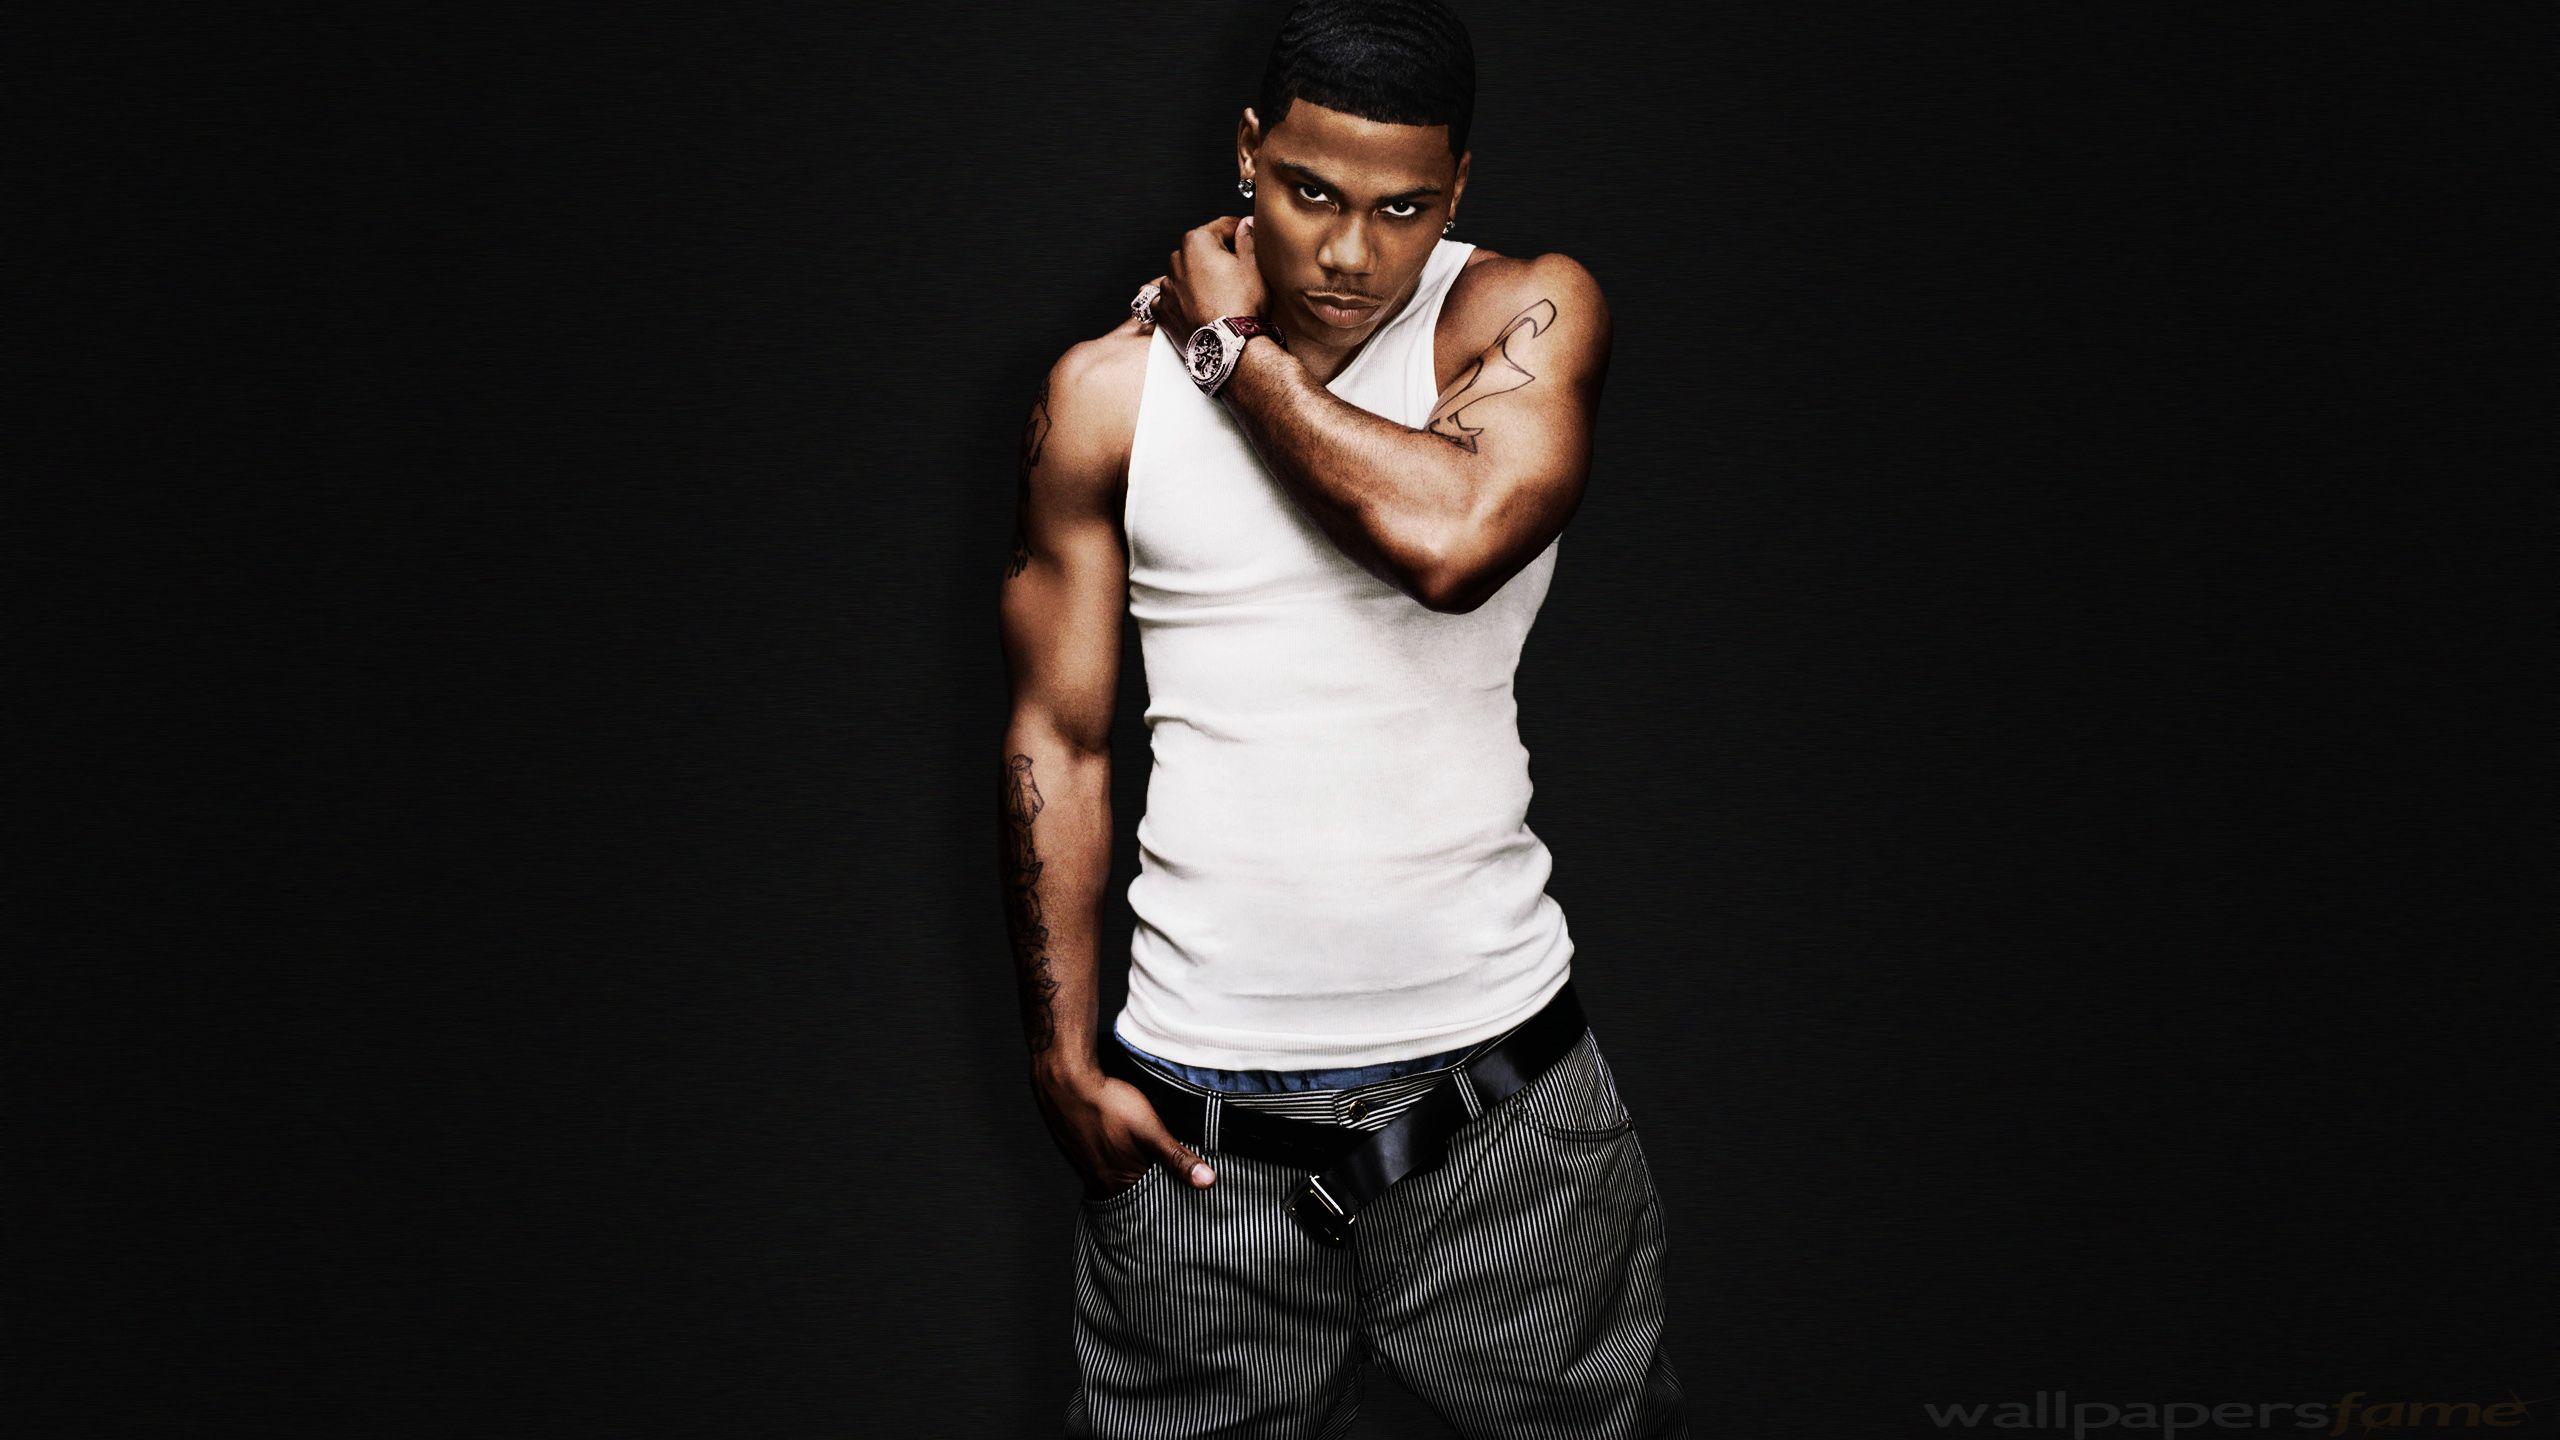 Nelly Wallpapers Wallpaper Cave